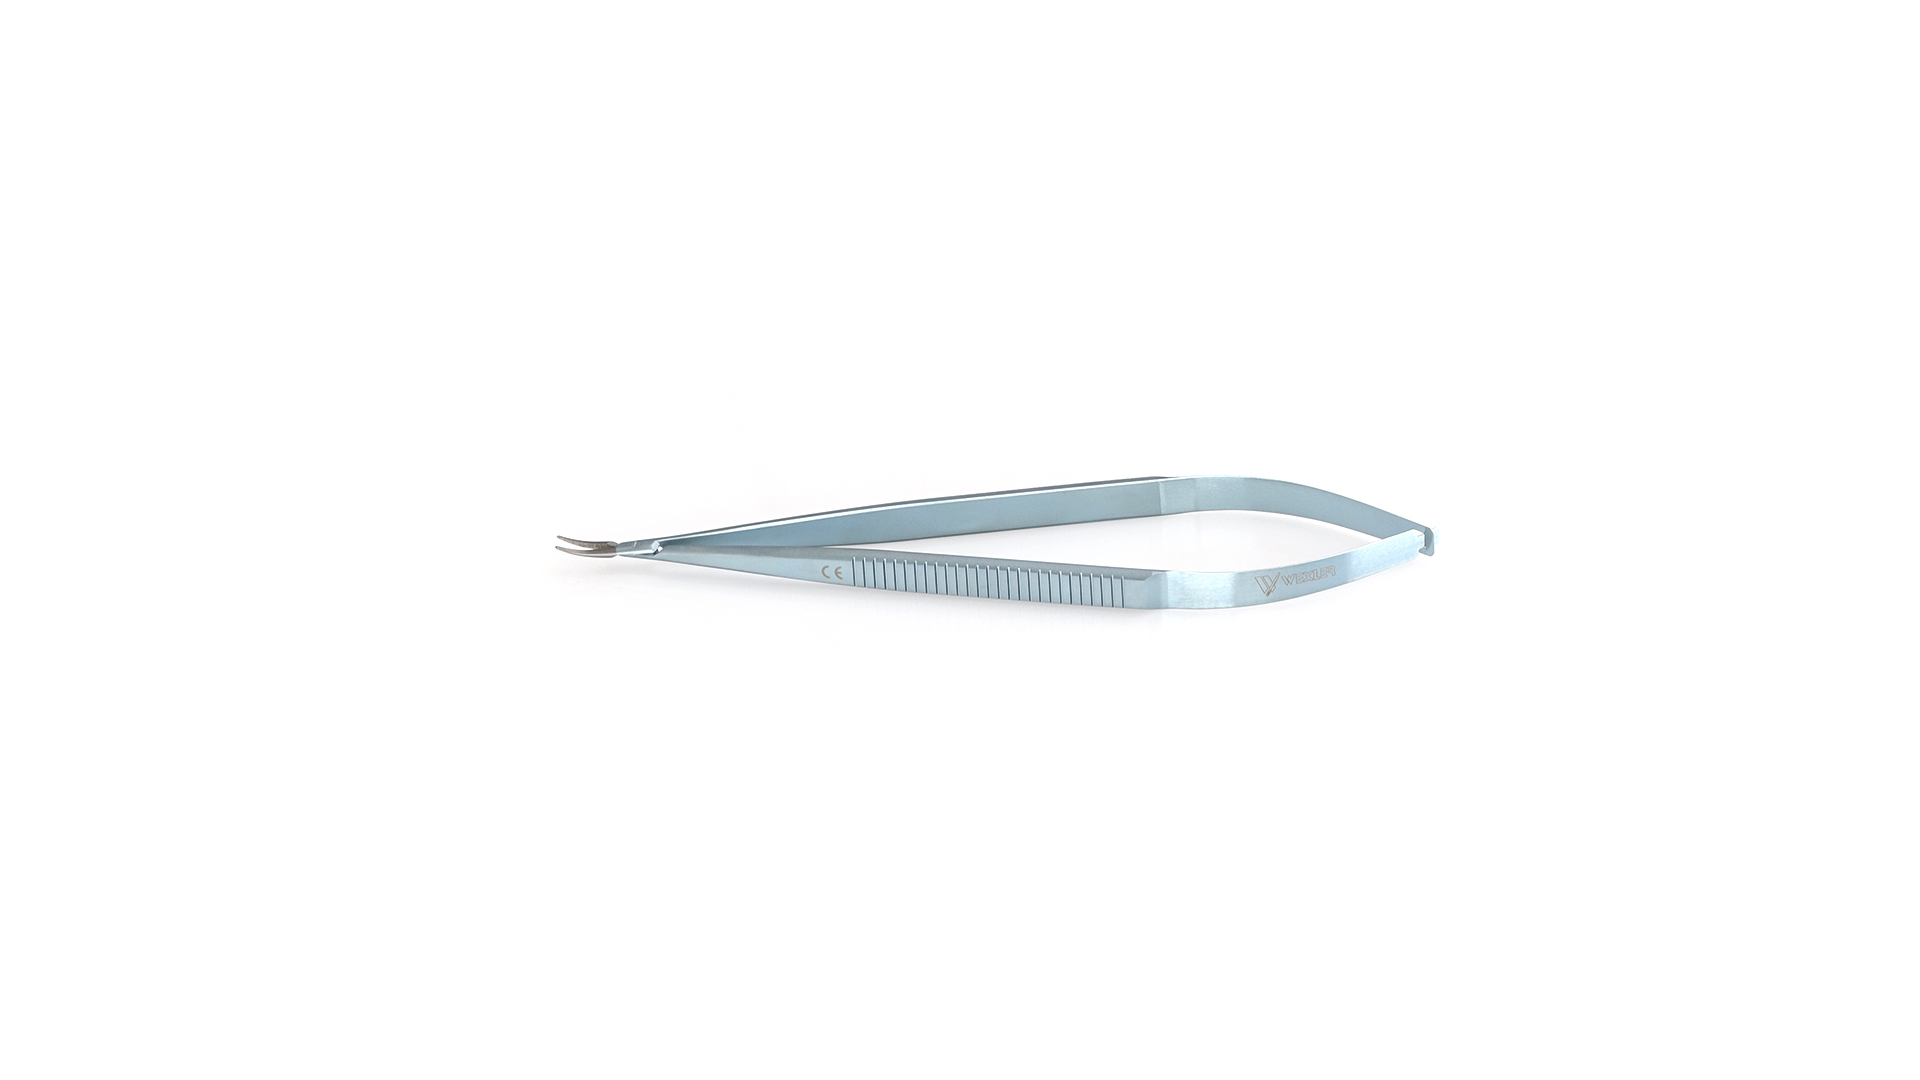 Castroviejo Delicate Needle Holder - Curved TC coated jaws